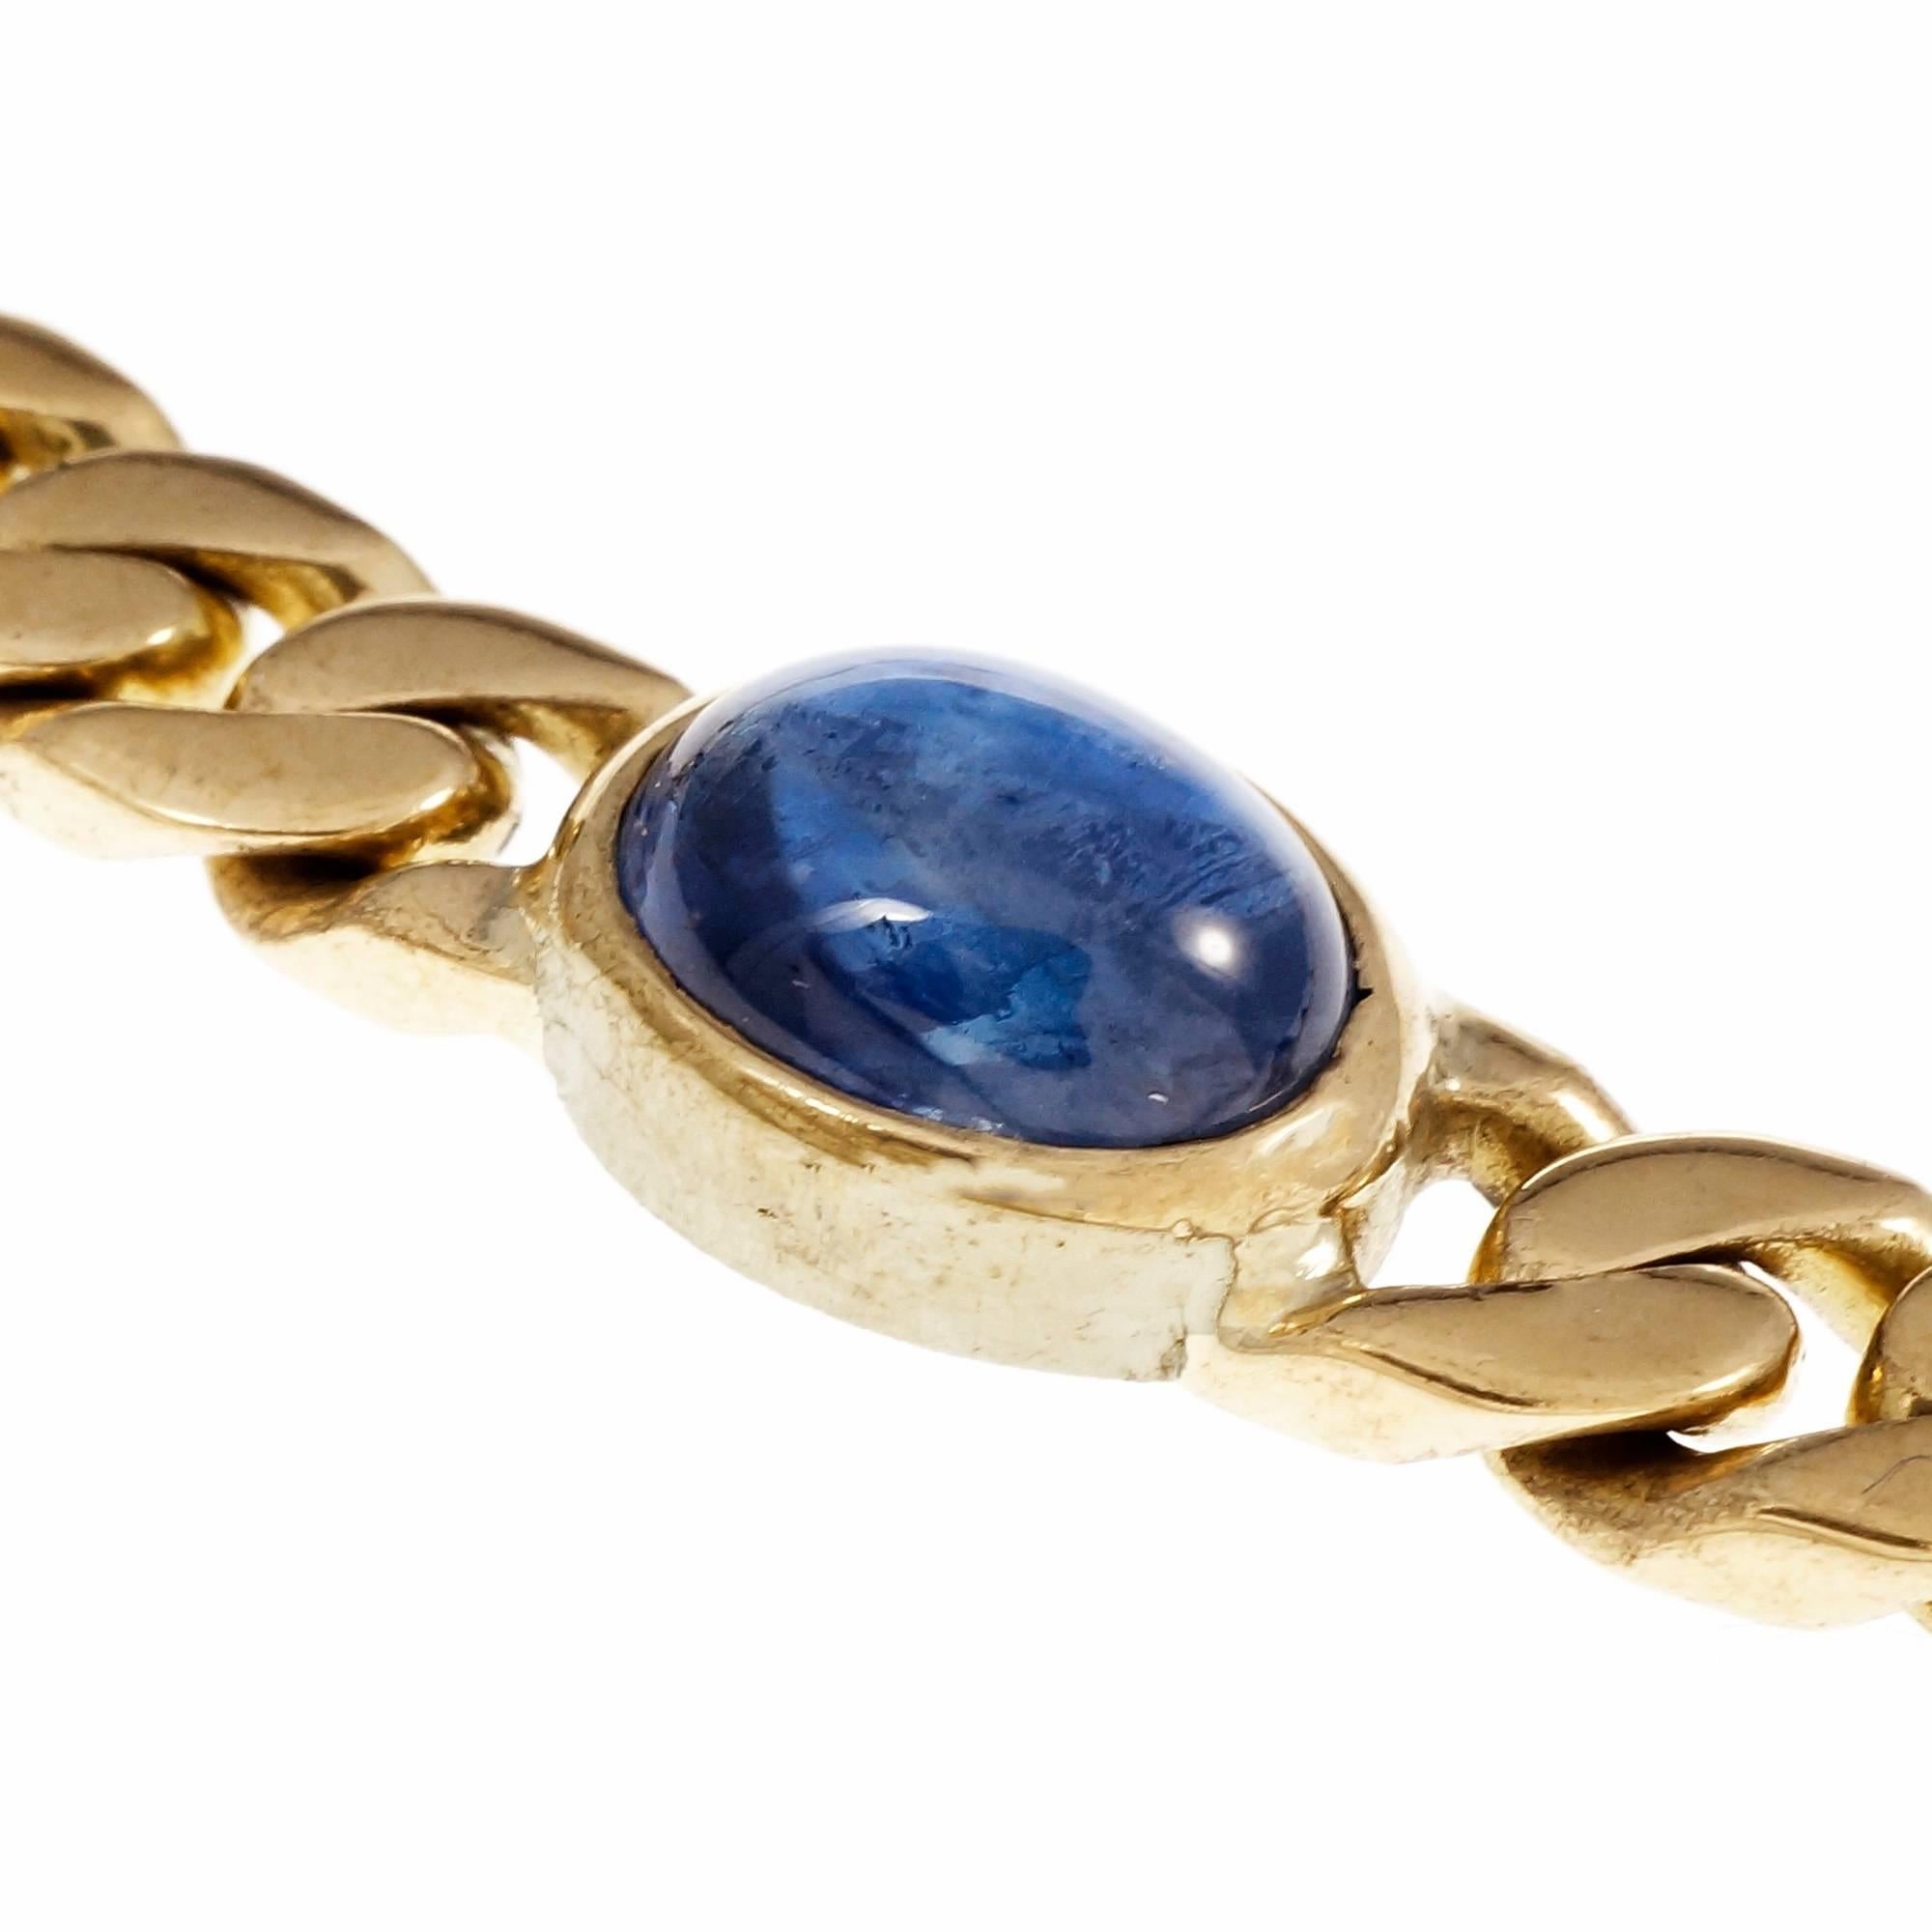 Vintage 1960’s solid 18k yellow gold heavy link necklace bezel set with 10 oval bright blue GIA certified natural cabochon sapphires simple heat only no other enhancements

10 oval cabochon blue sapphires 7.37 x 5.29 x 4.18mm approximately 15.50